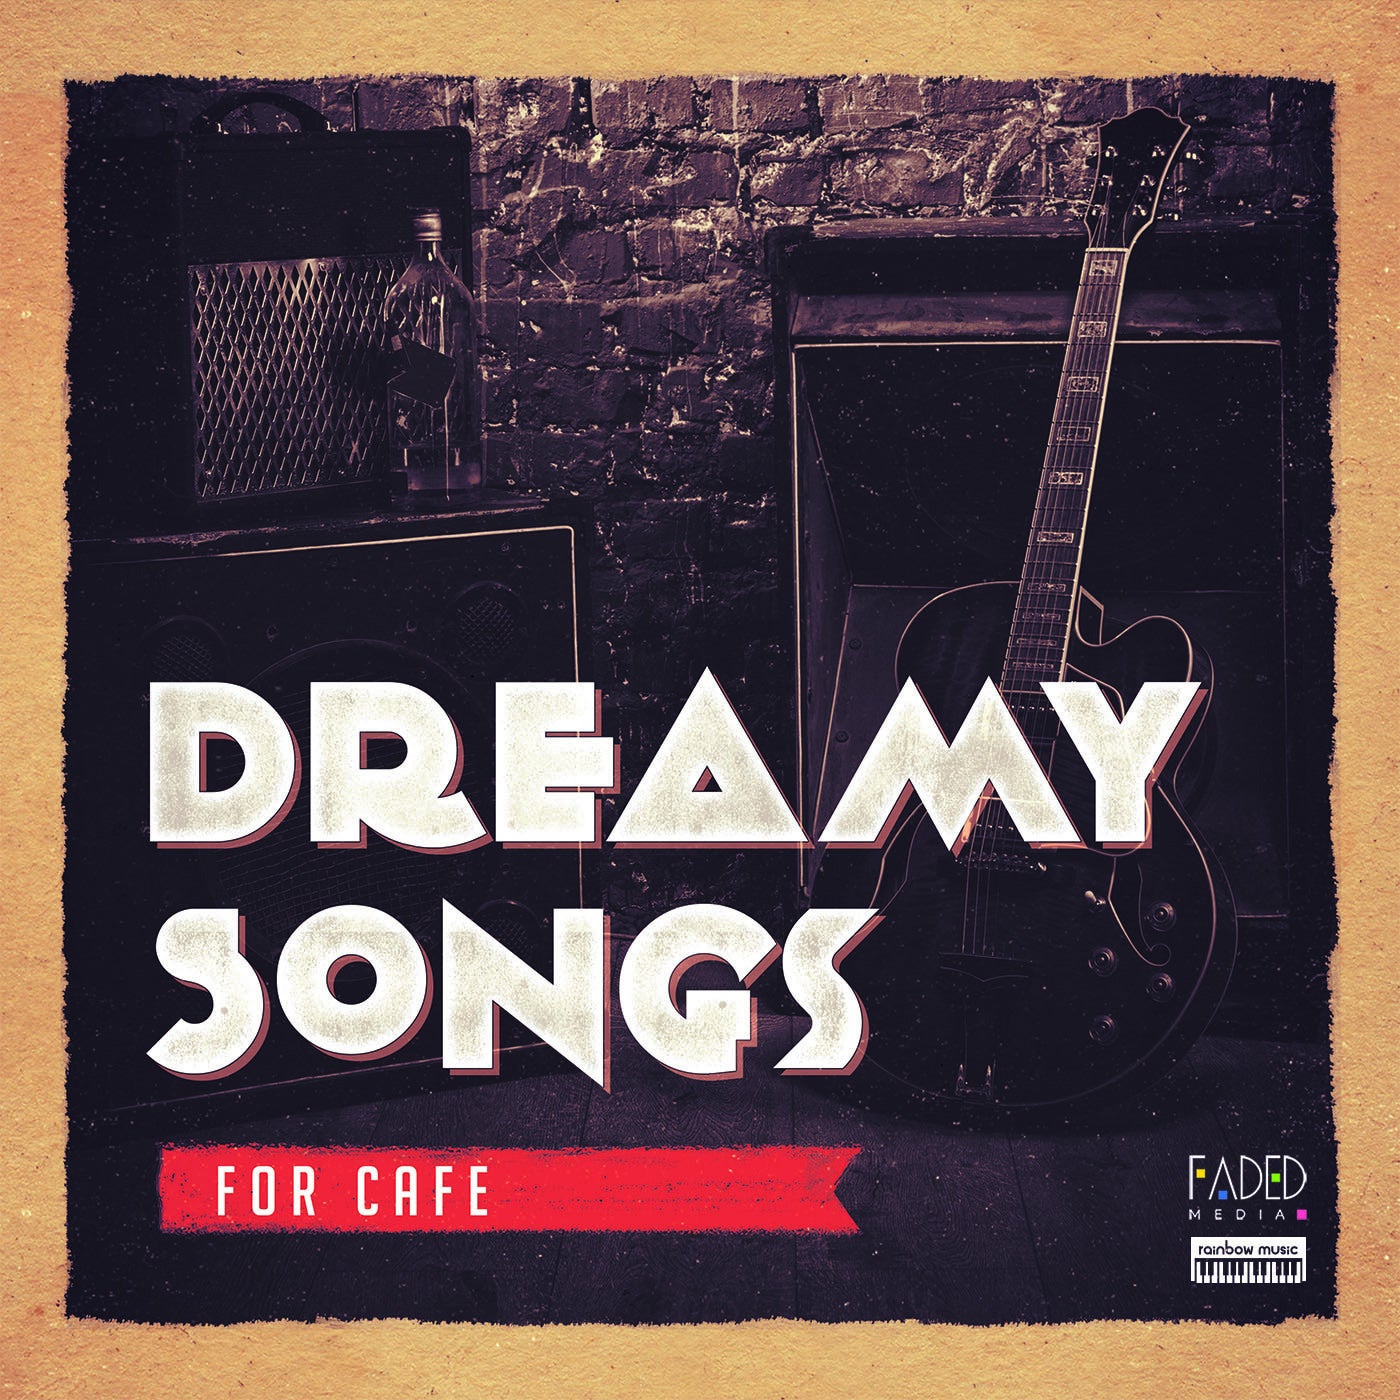 Dreamy Songs for Cafe